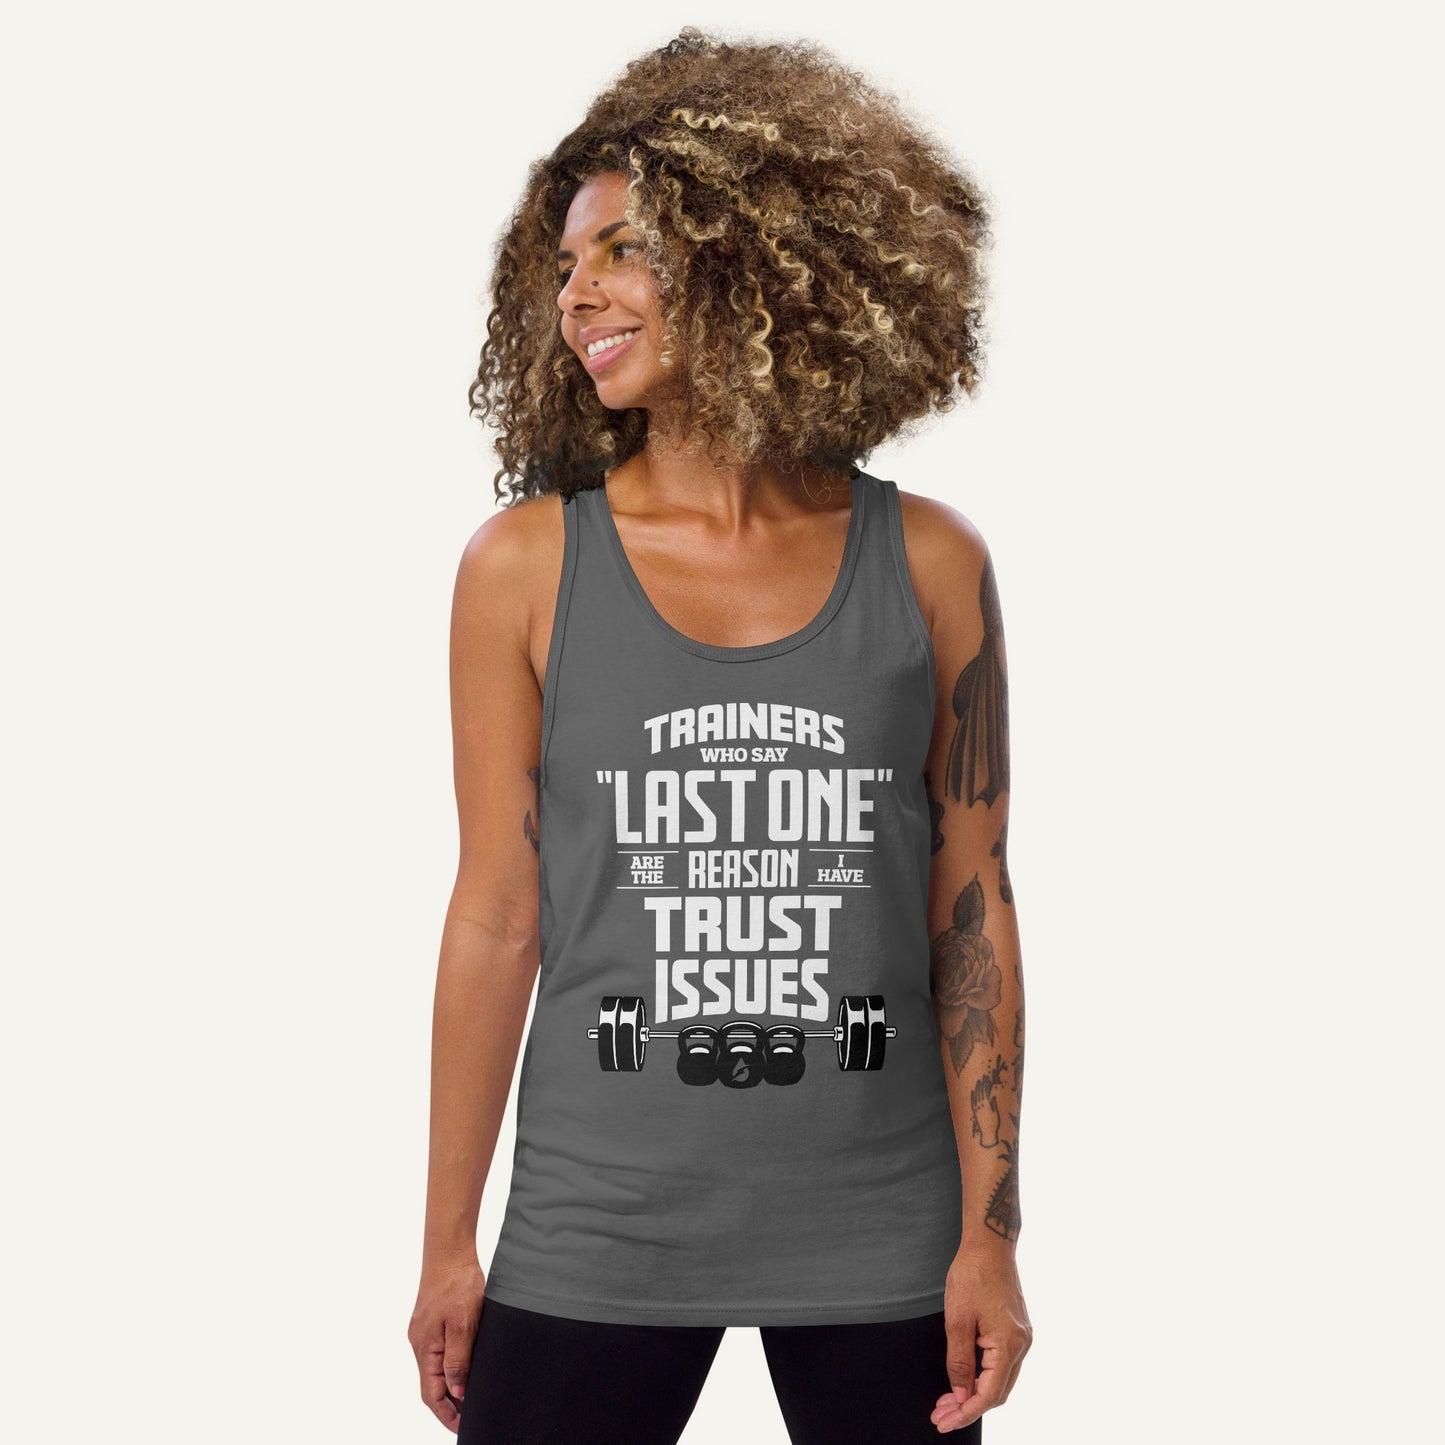 Trainers Who Say Last One Are The Reason I Have Trust Issues Men's Tank Top